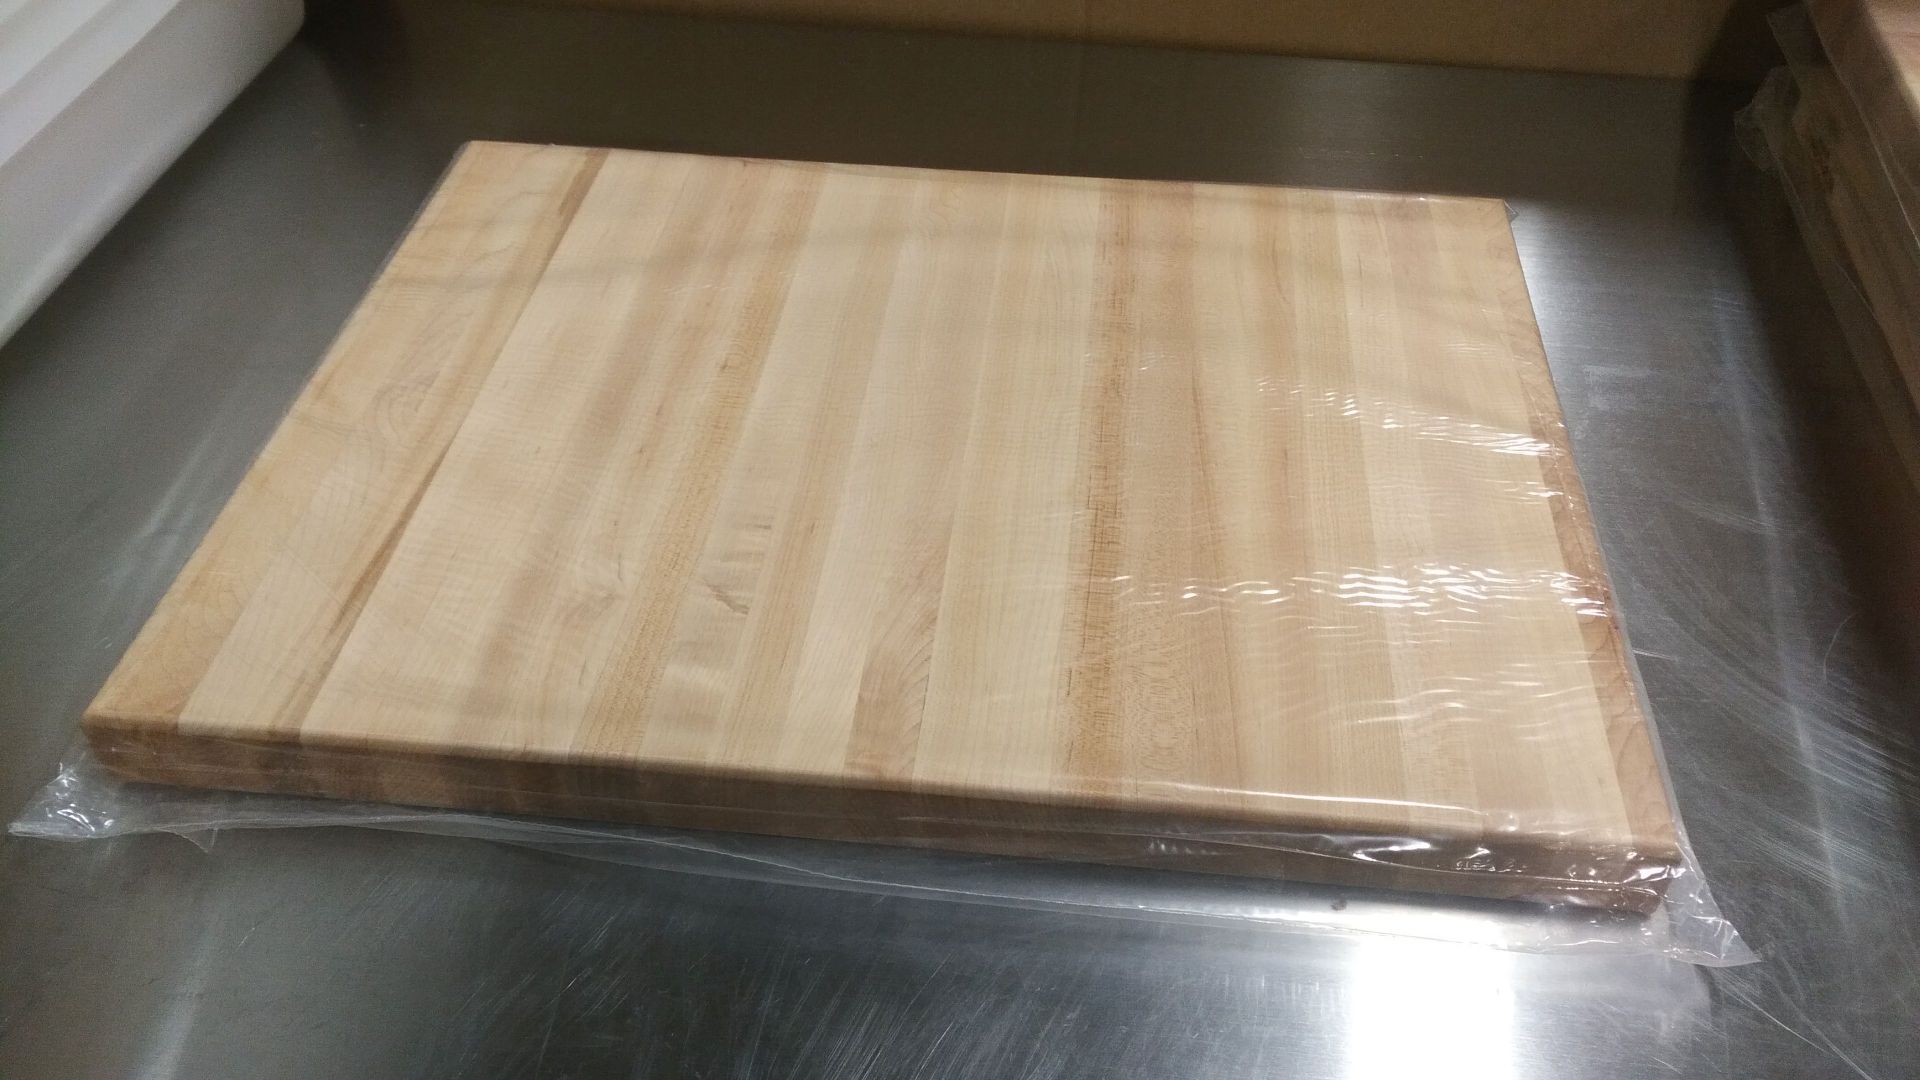 20" x 15" x 1.5" Hard Canadian Maple Carving Board